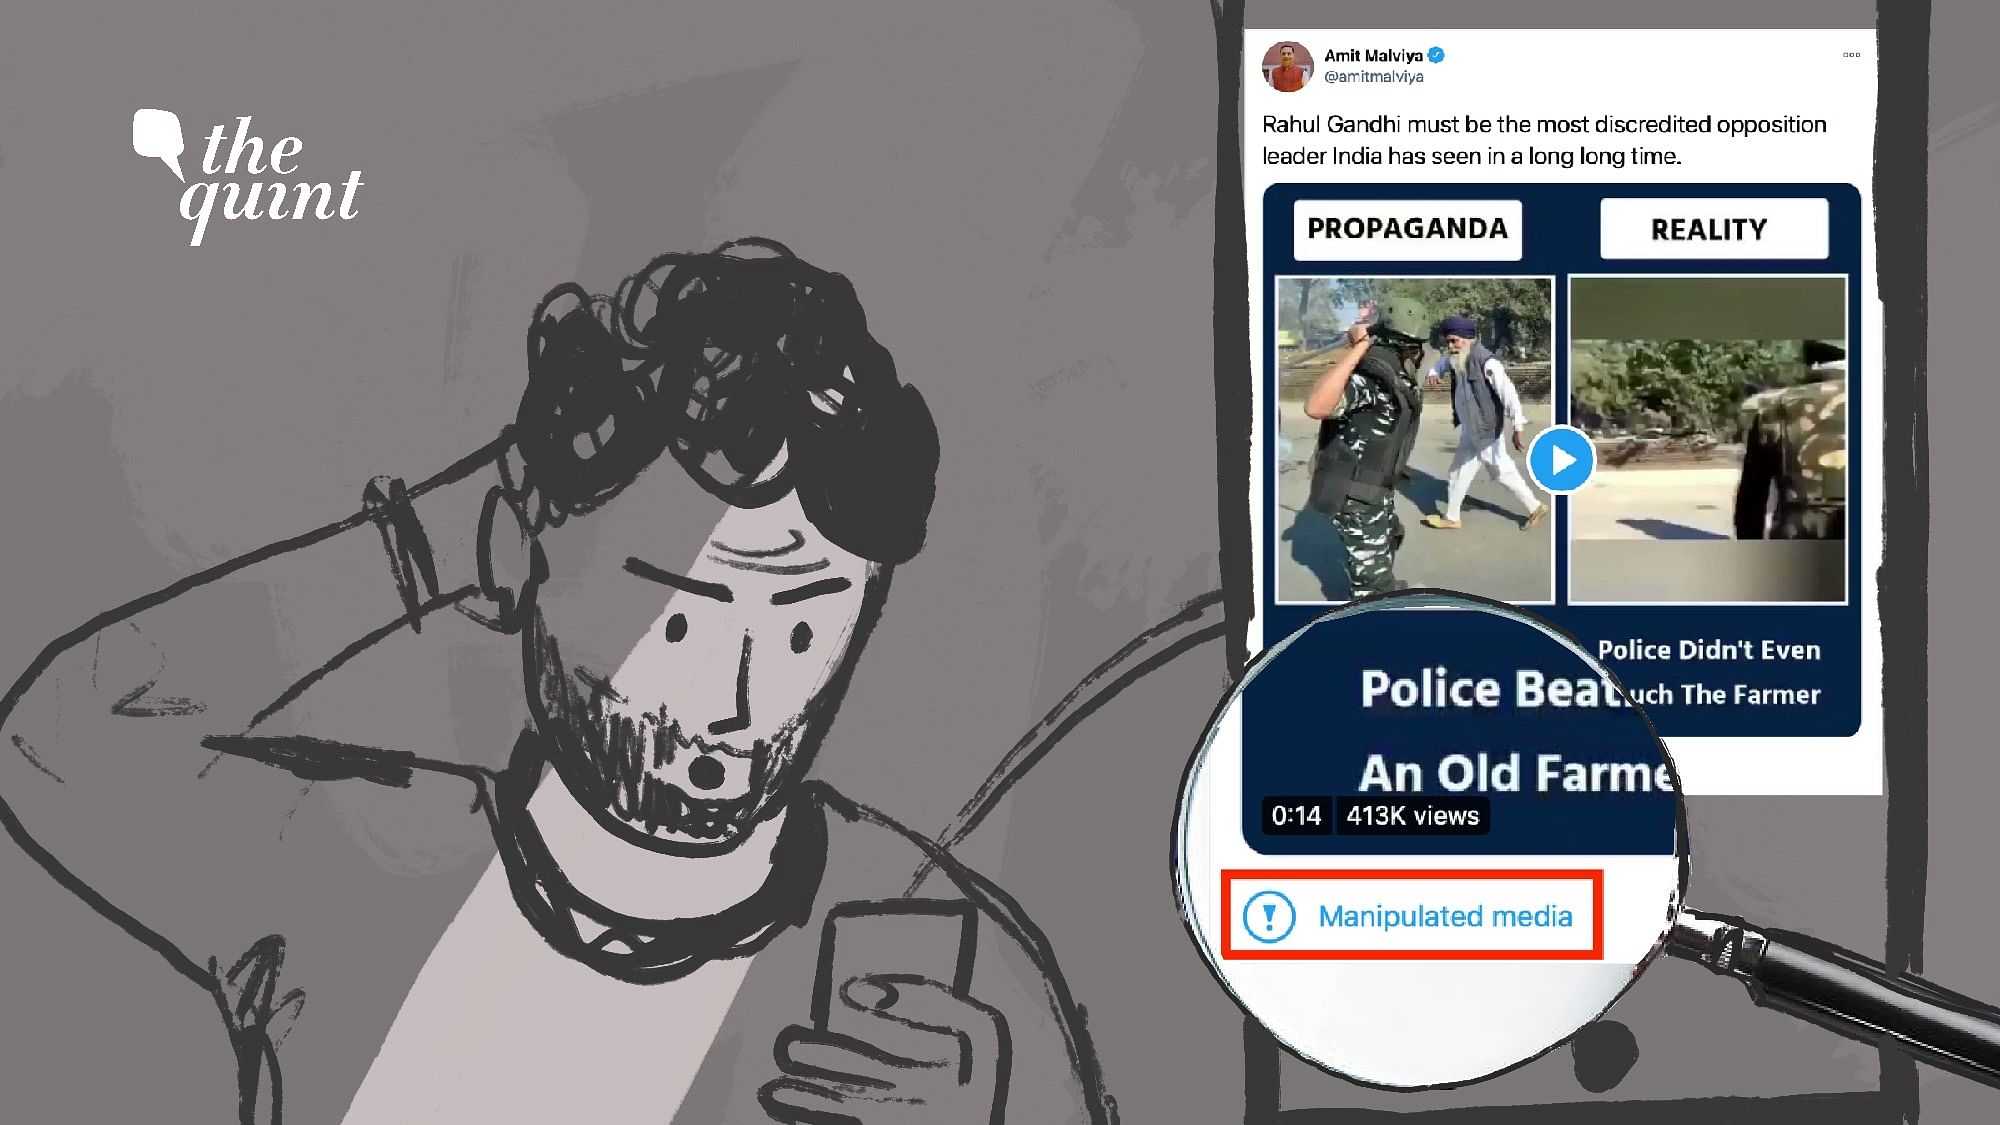 Days after BJP IT Cell head Amit Malviya, notorious for spreading disinformation, shared a ‘propaganda vs reality’ video from the ongoing farmers’ protest, Twitter labelled his tweet as ‘manipulated media’.